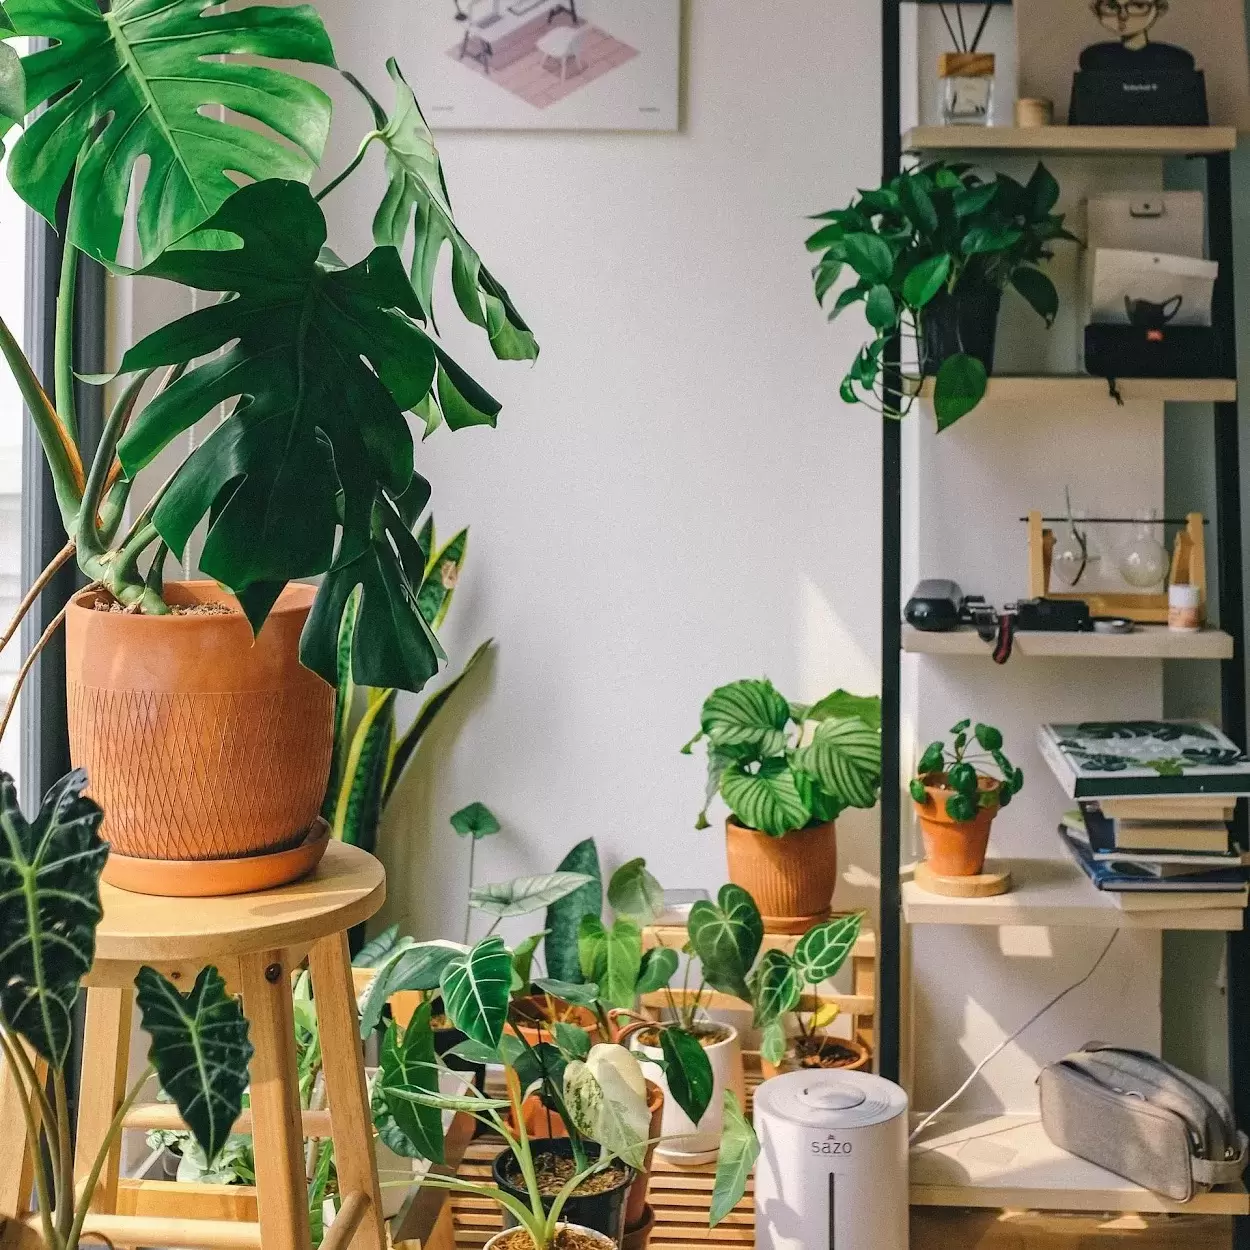 A plant corner in an apartment. Photo by Huy Phan on Unsplash.